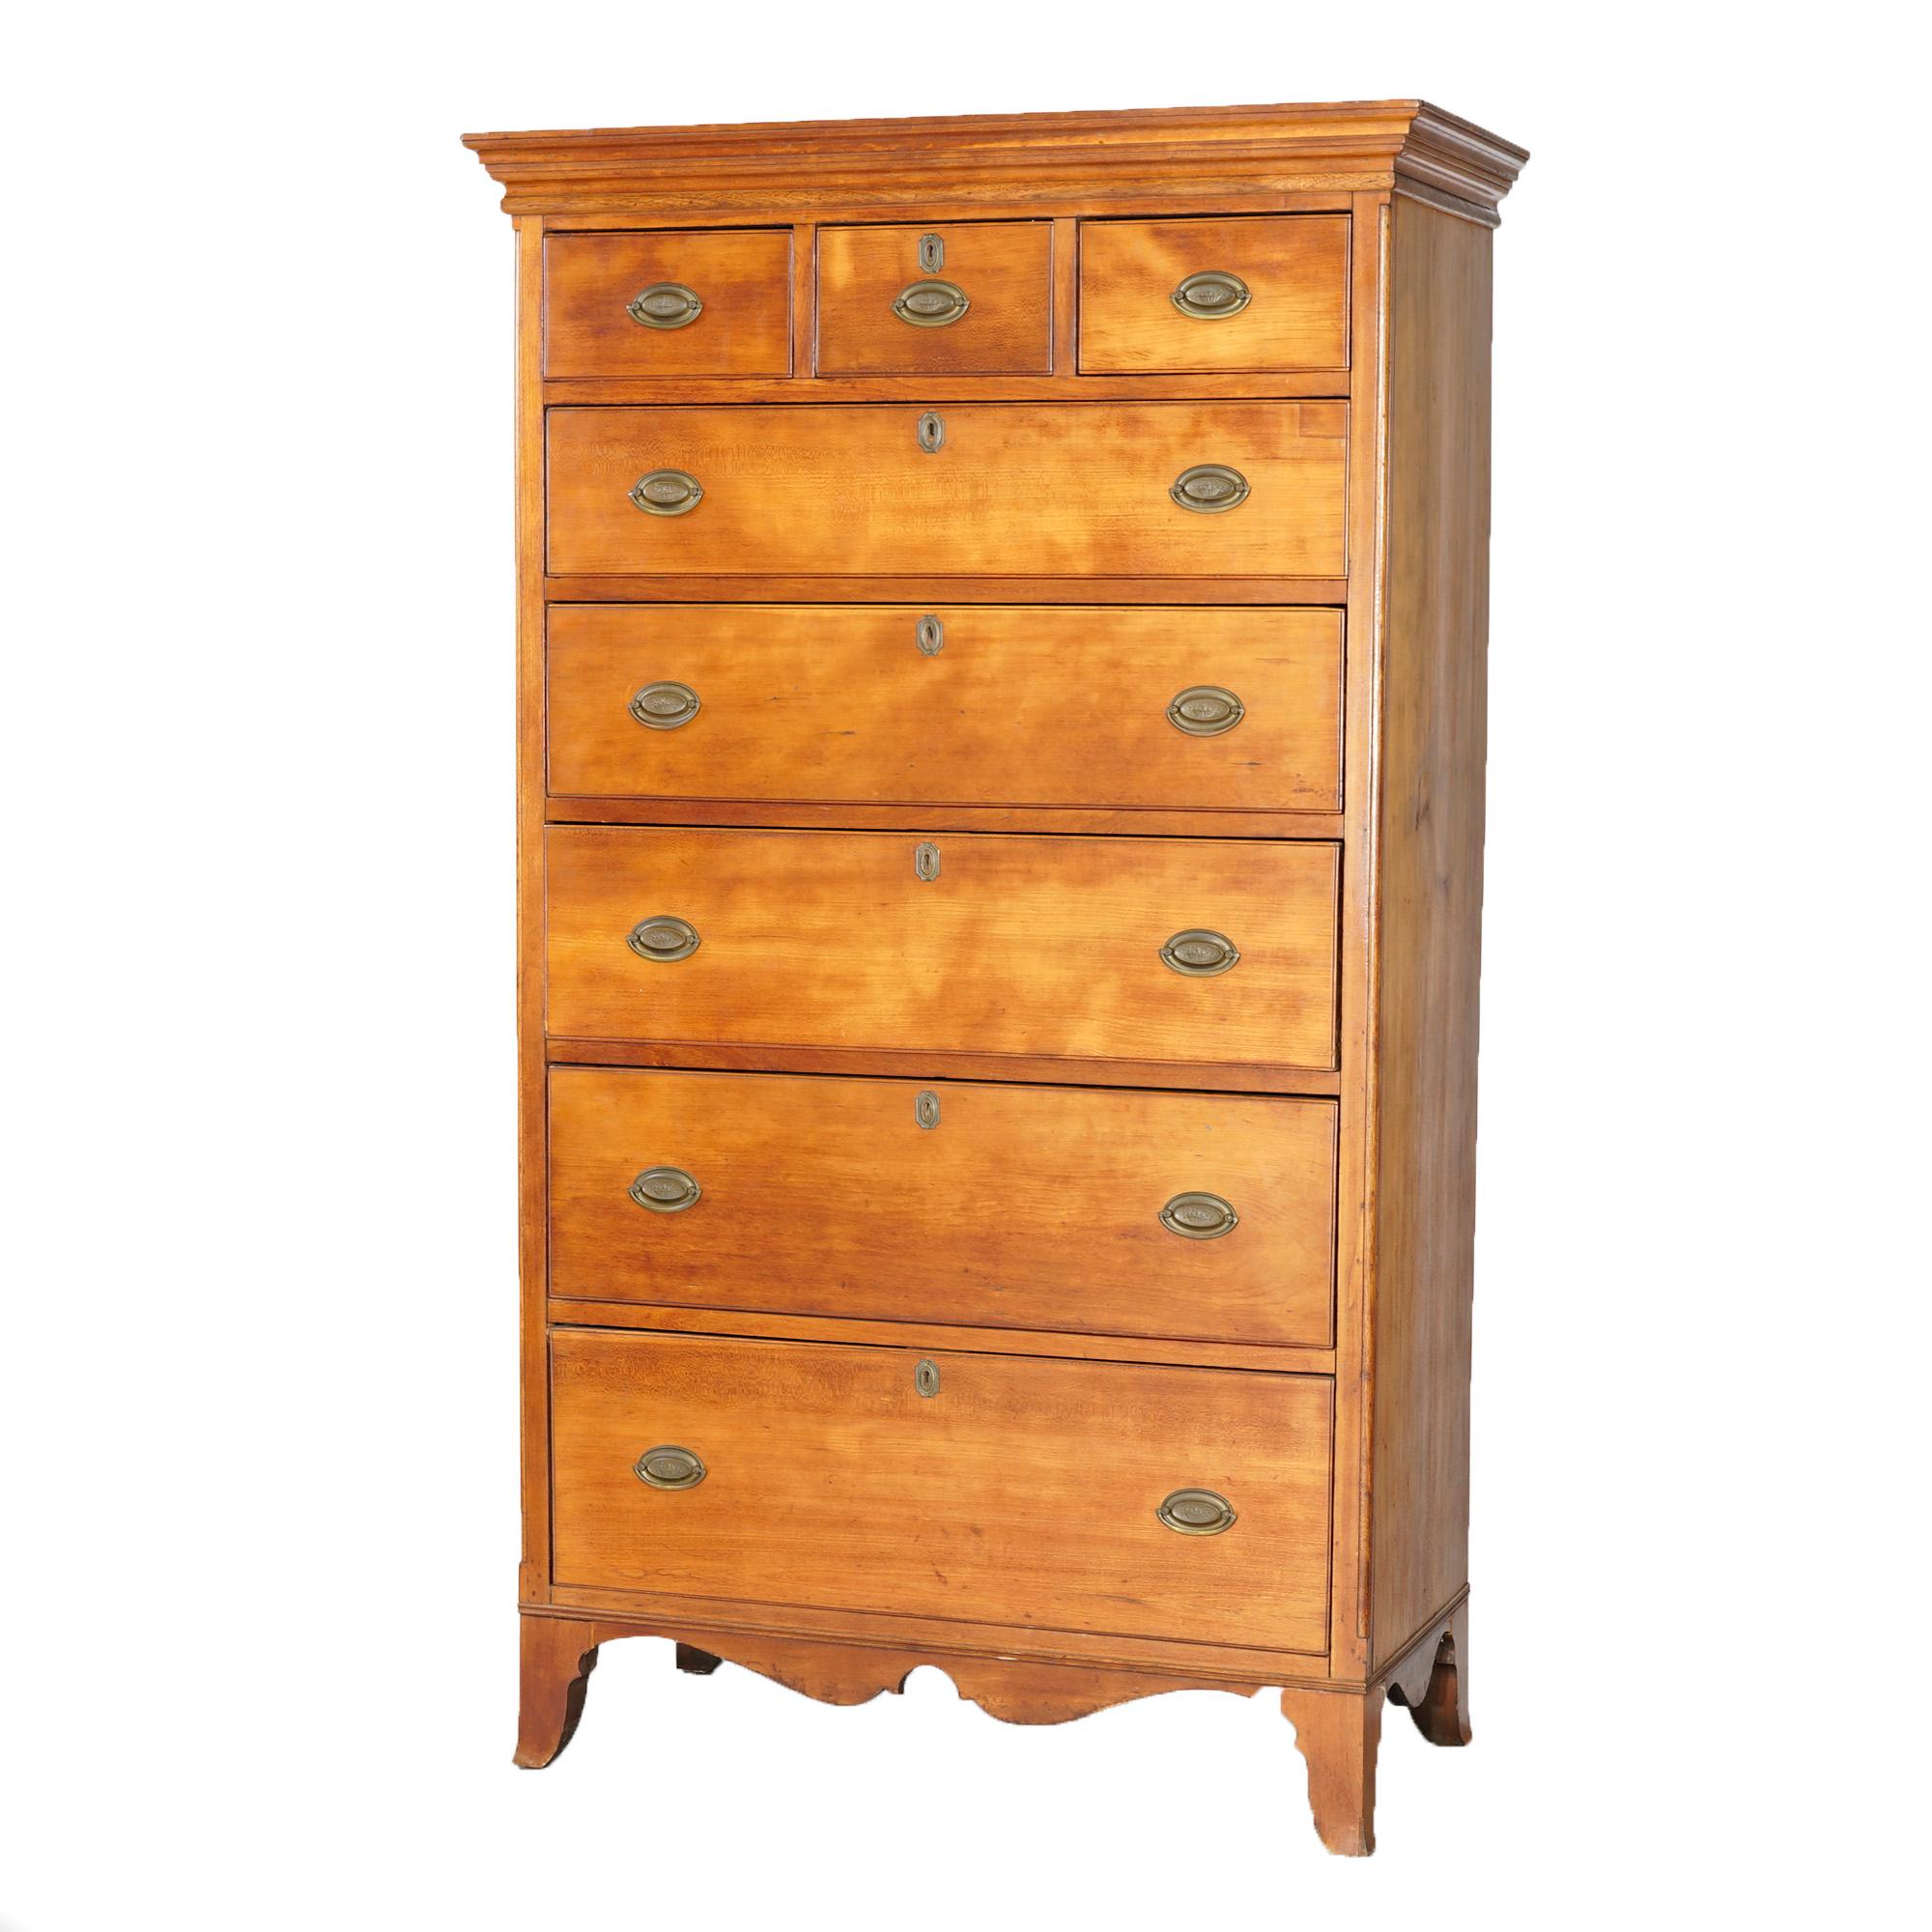 An antique Chippendale tall chest of drawers offers cherry construction with three small drawers over five graduated long drawers, c1820

Measures- 68.5'' H x 40.25'' W x 19.5'' D.